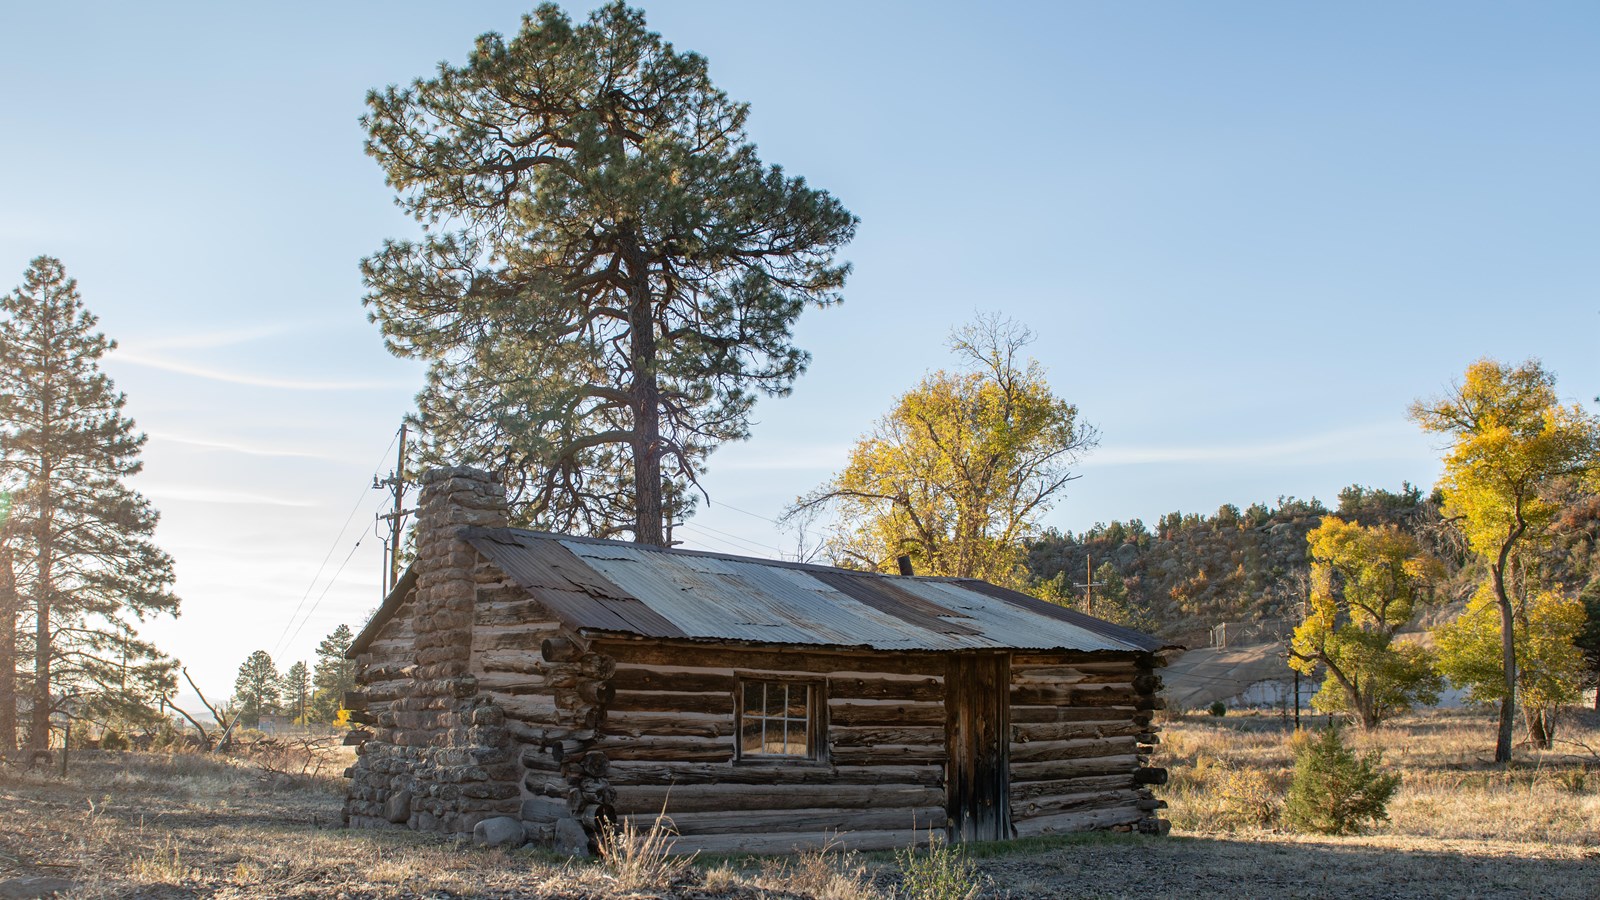 A log cabin sits in a field with trees and hills in the background